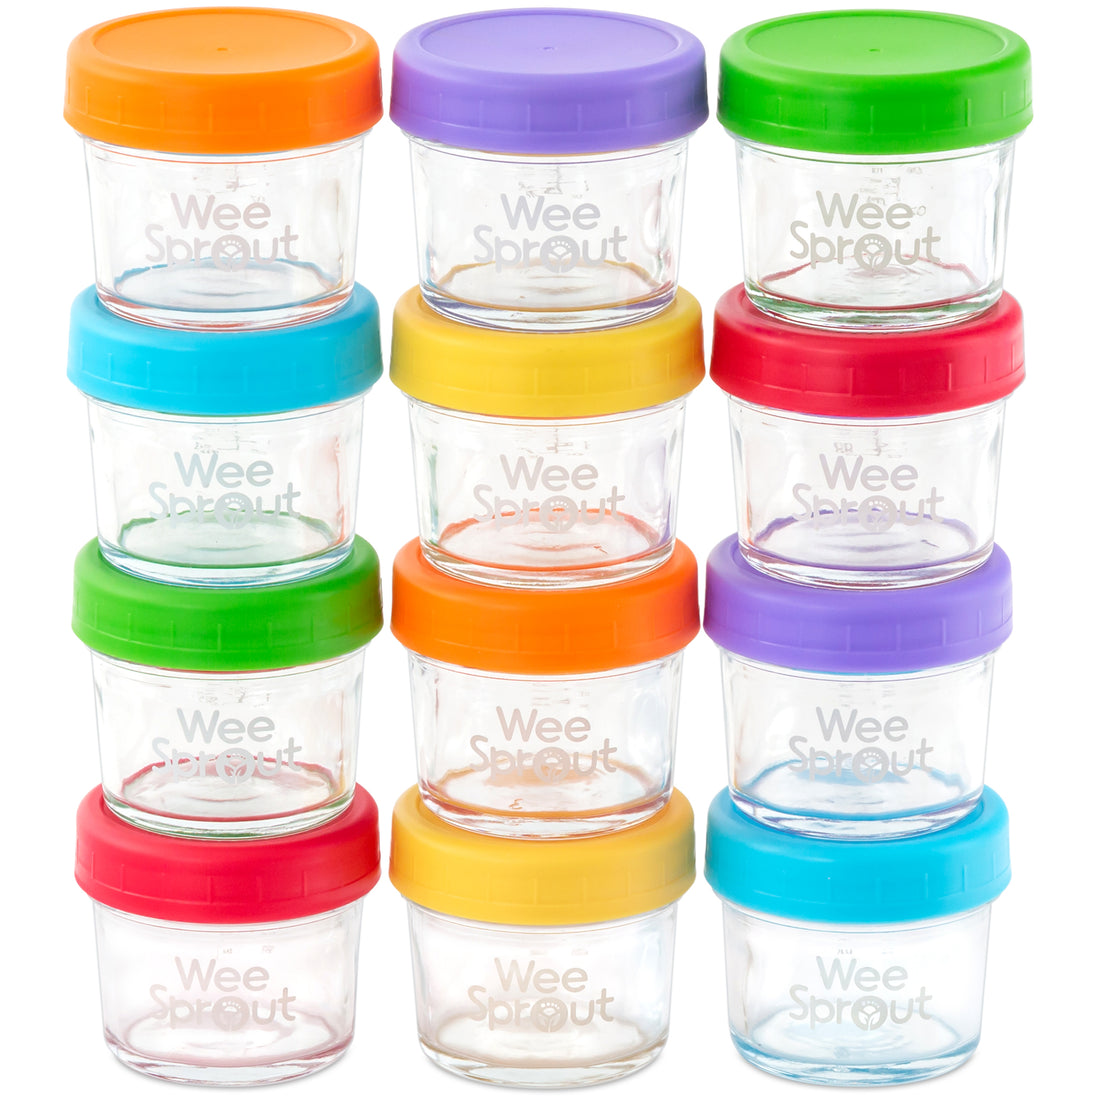 Supermama Baby Food Containers - 7 oz(6 Pack), Reusable Baby Food Jars with  Airtight Lids Leak Proof, Small Food Storage Containers for Baby, BPA Free,  Microwave?Dishwasher & Freezer Safe, Pink 7 oz (